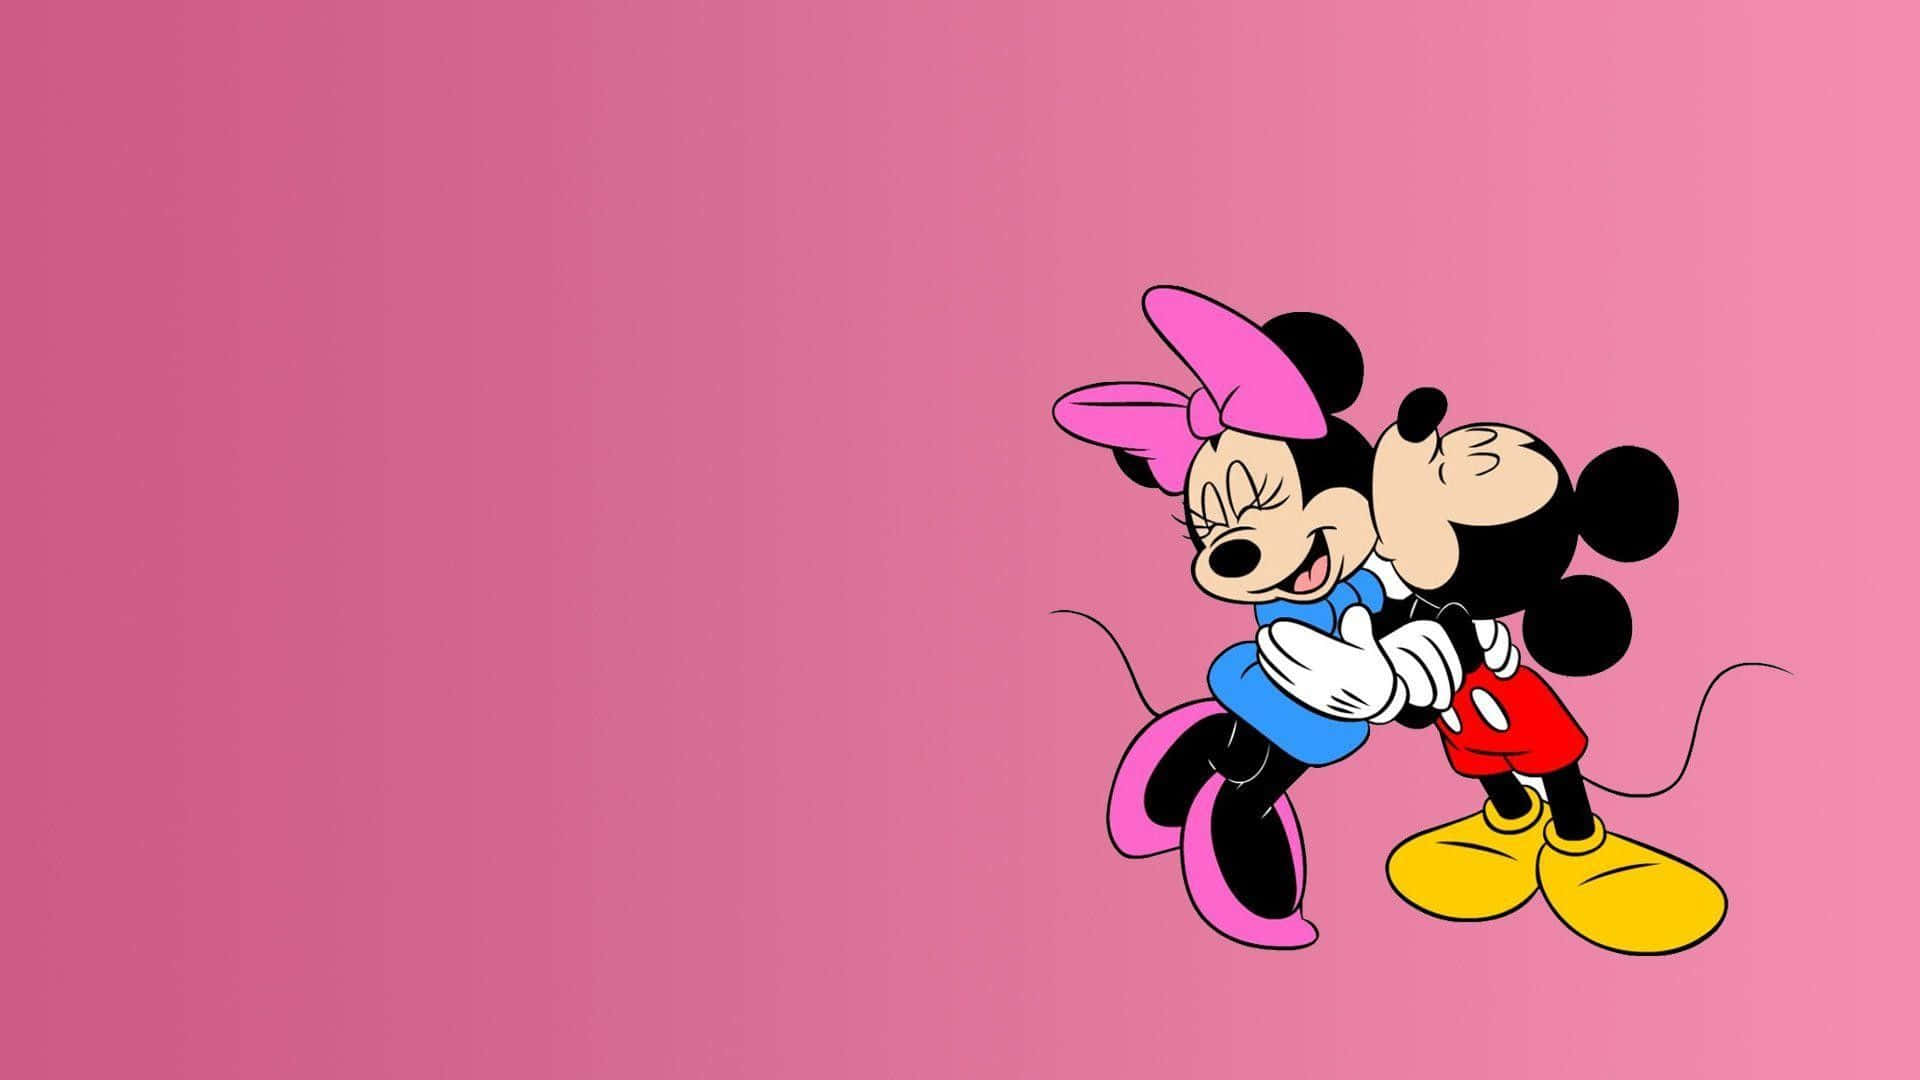 Adorable Mickey Mouse